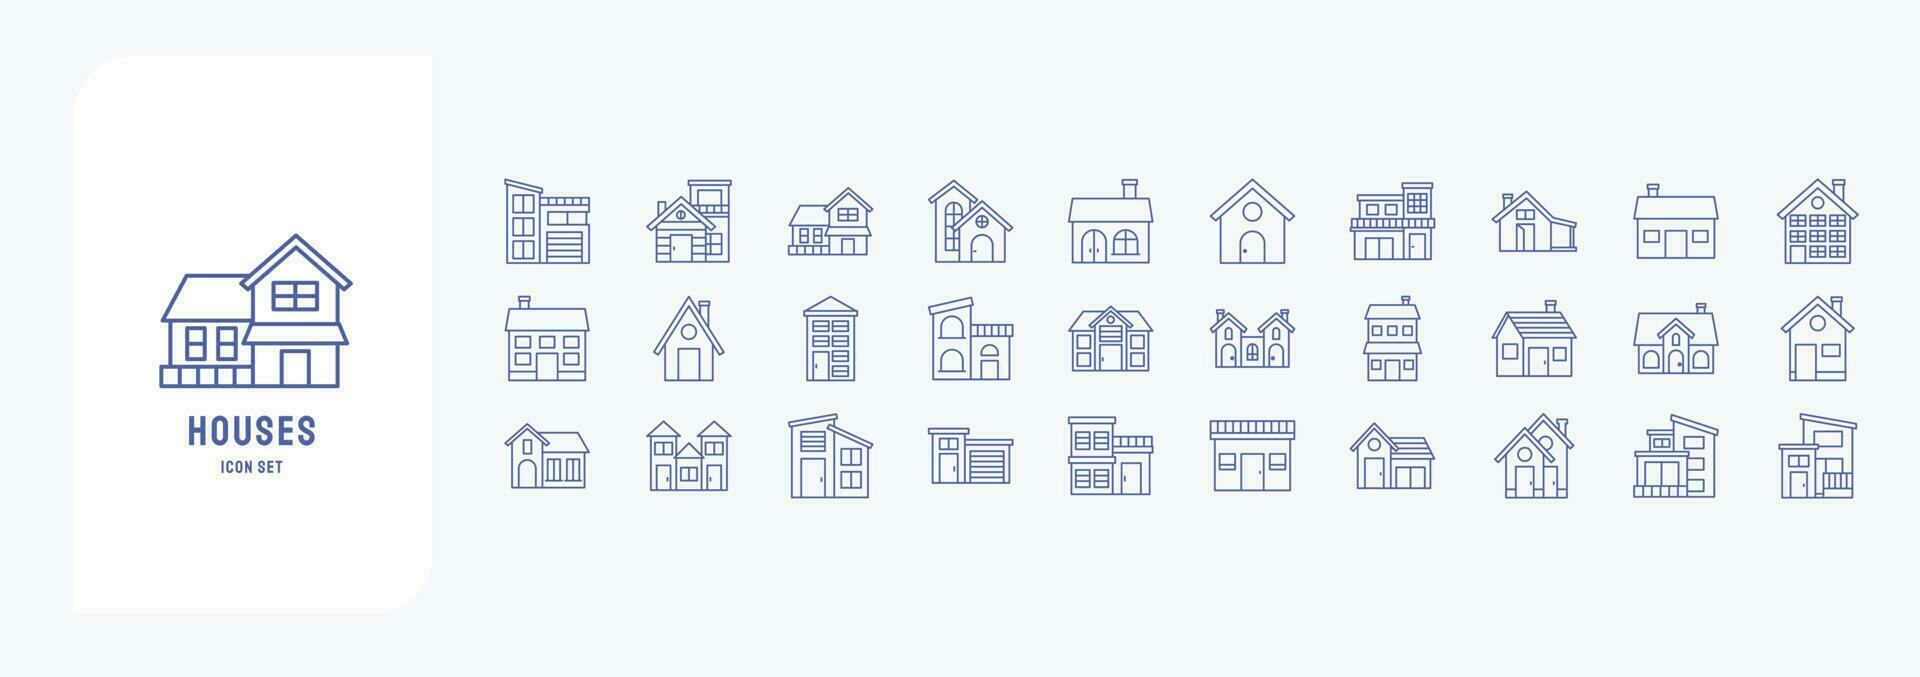 Home and Houses, including icons like building, real estate, Architecture and more vector